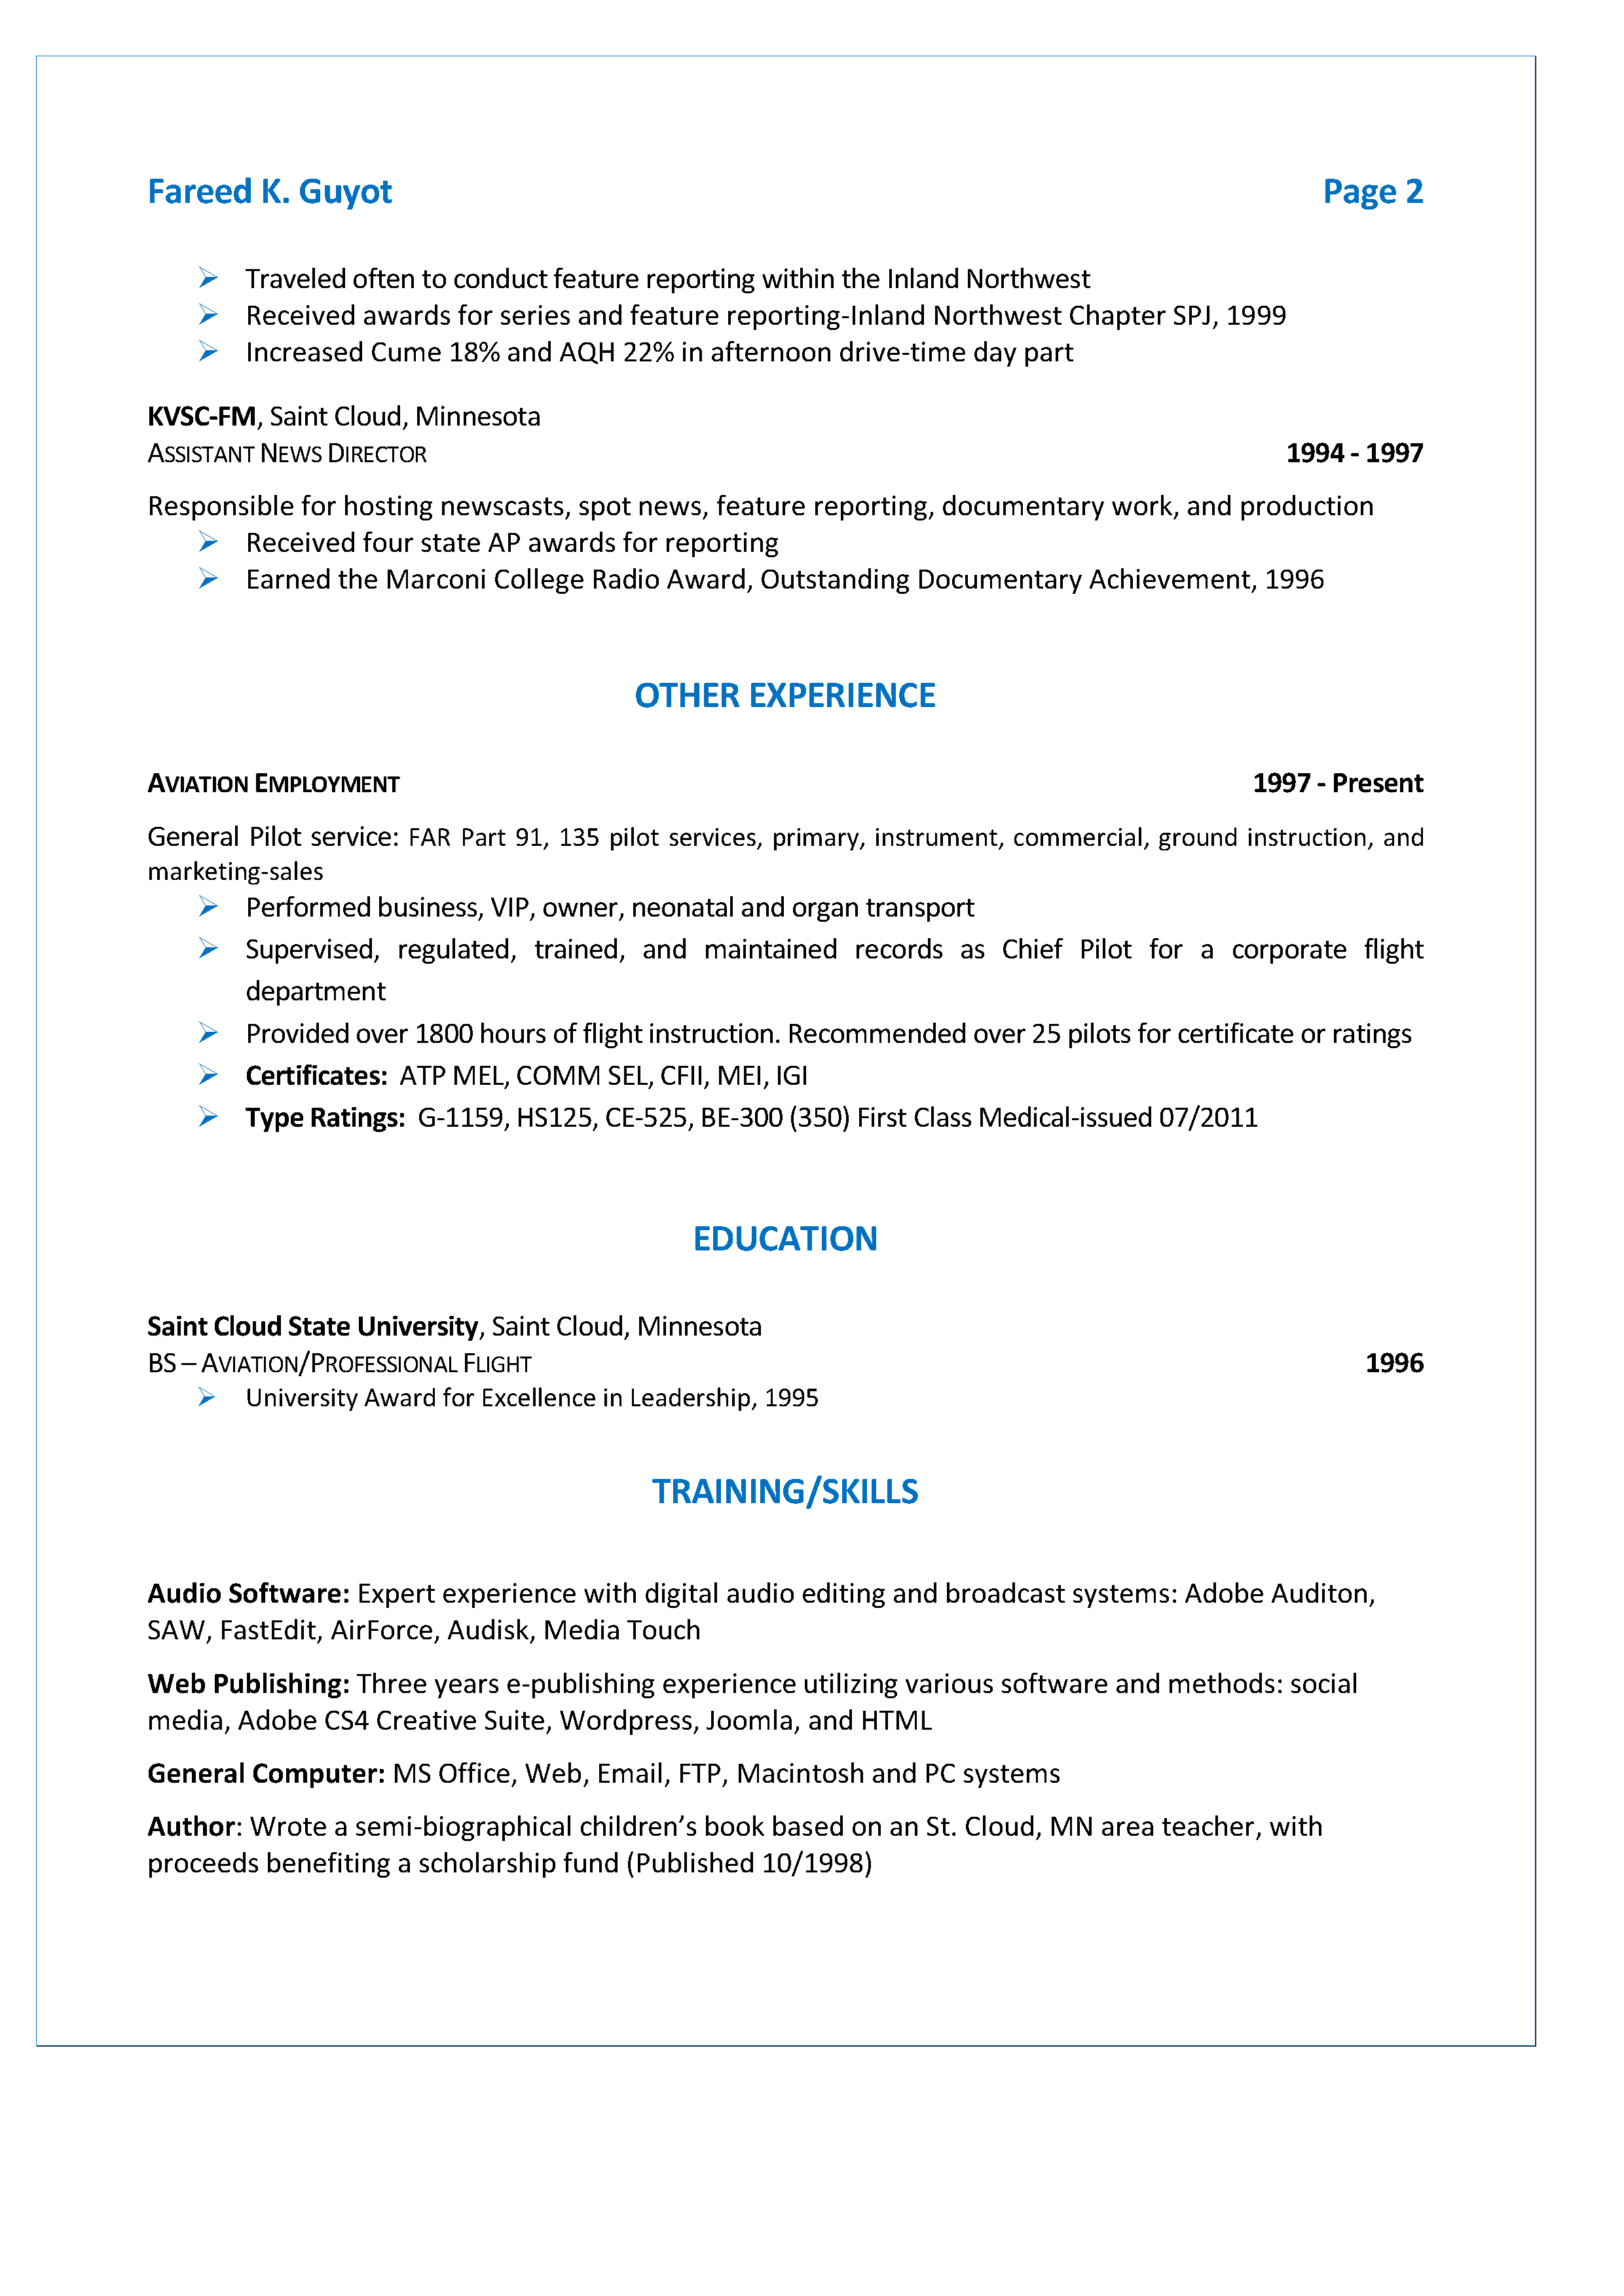 Resume - Page 2